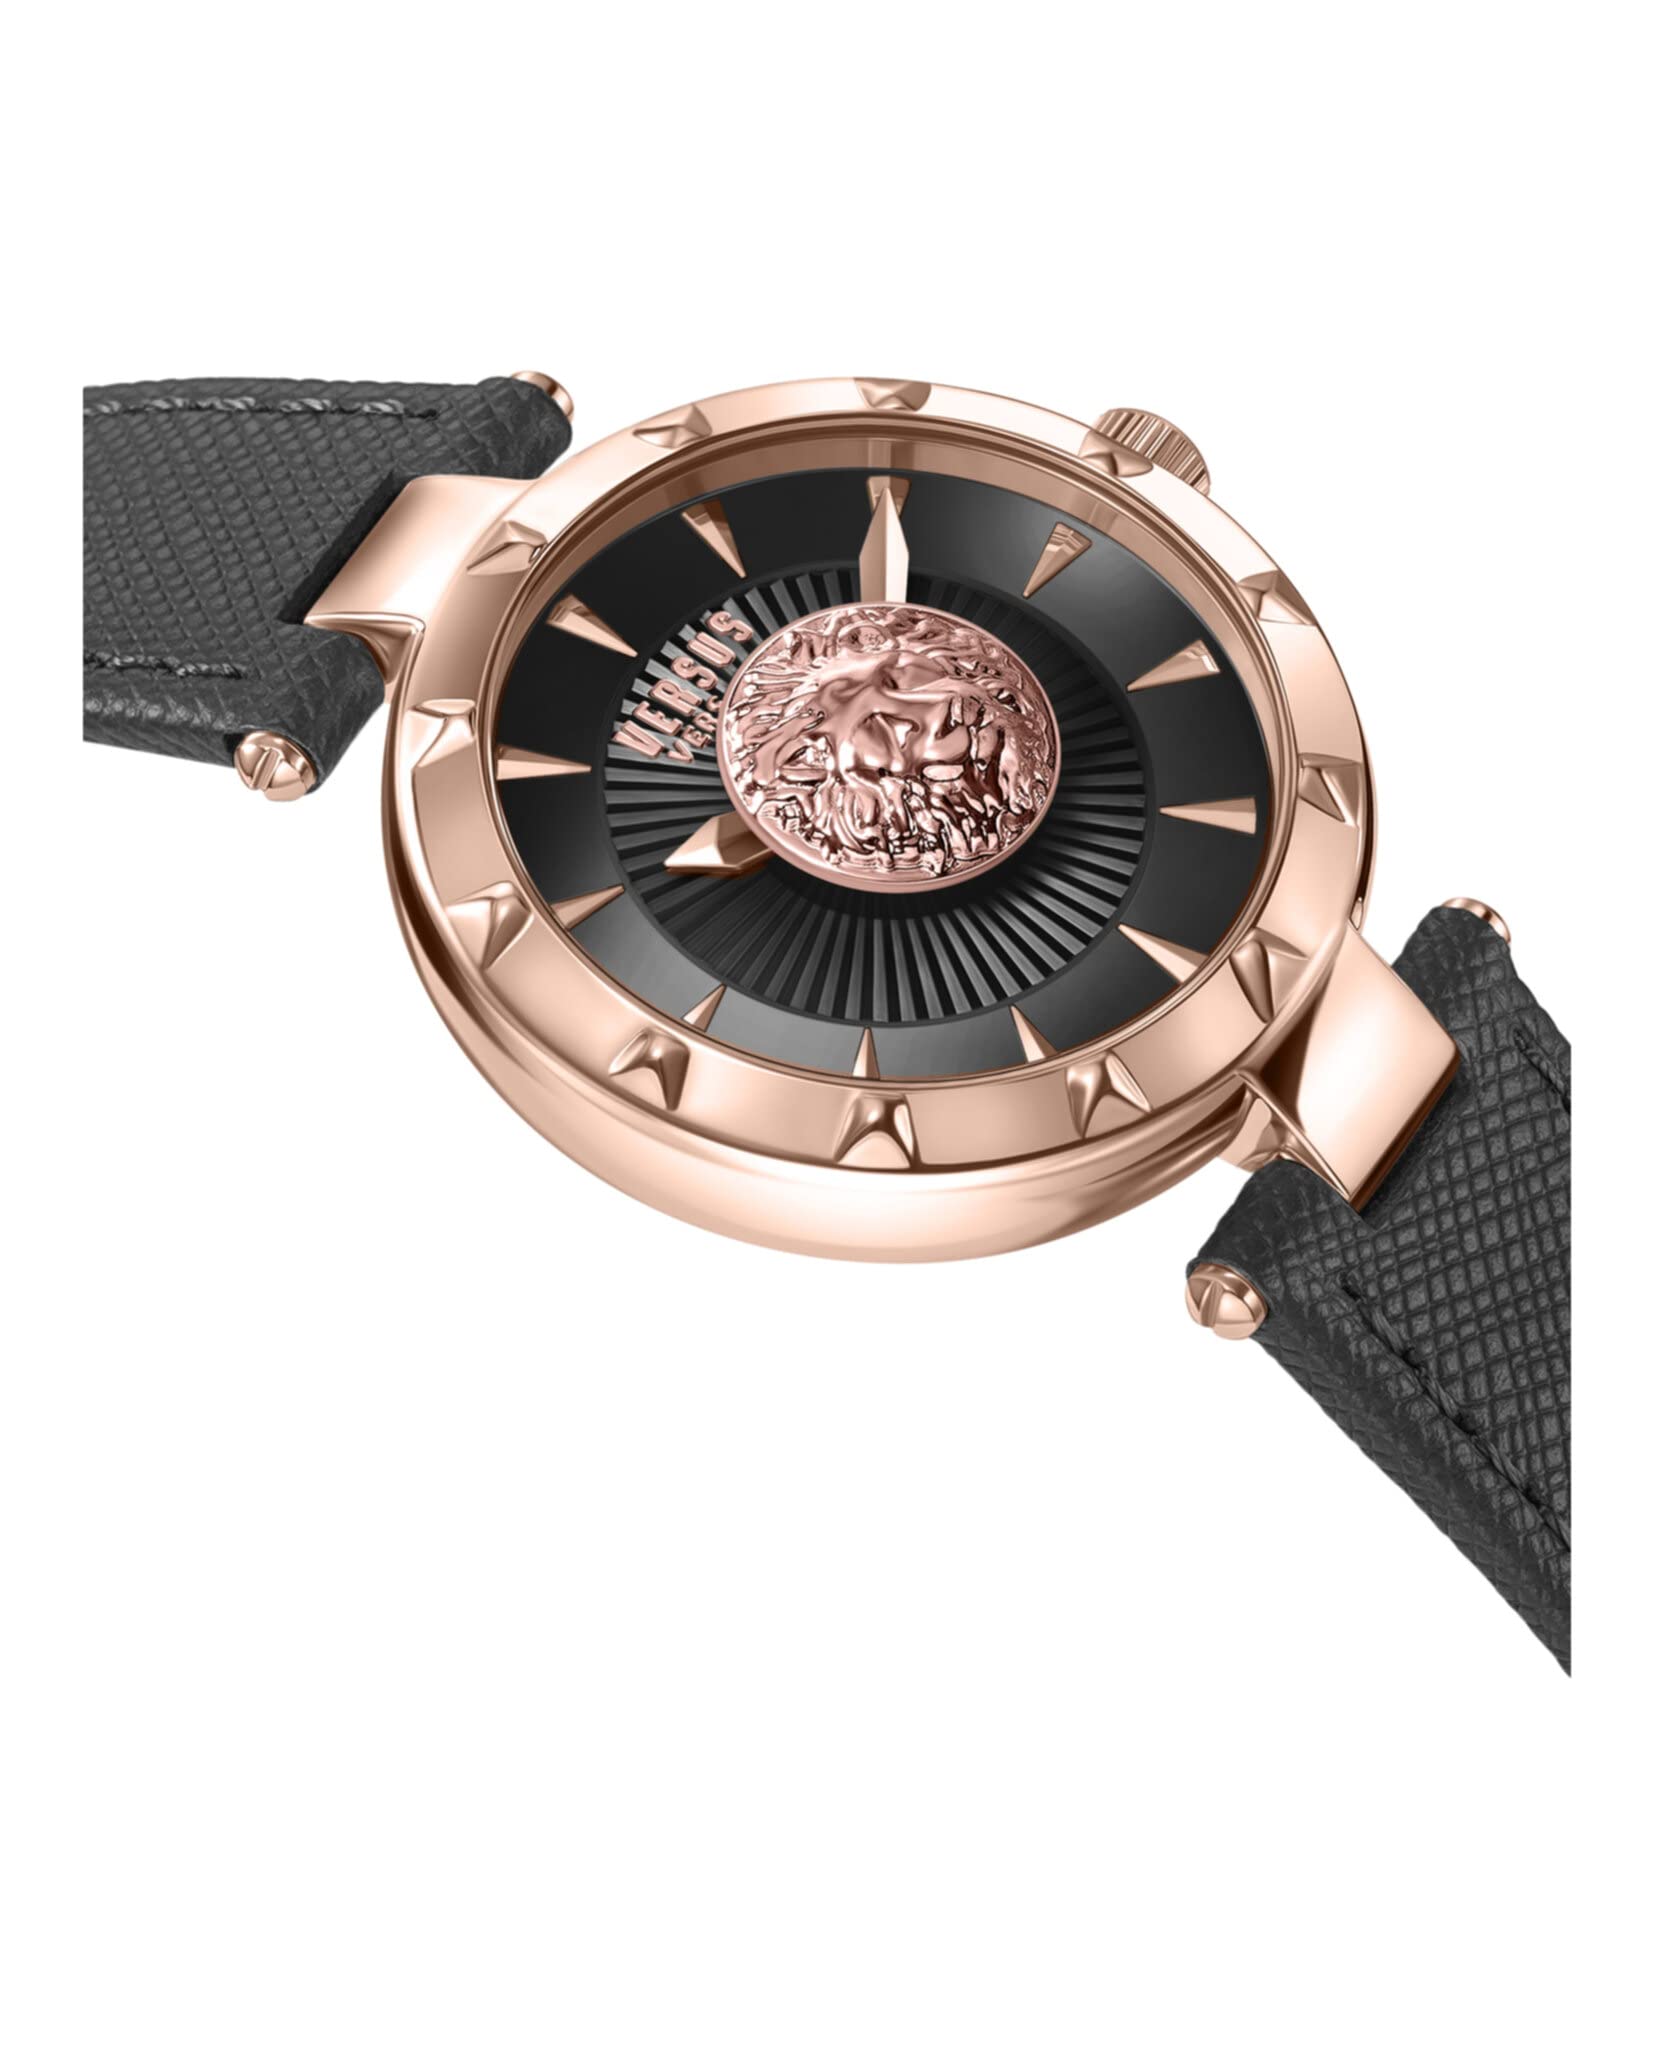 Versus Versace Sertie Collection Luxury Womens Watch Timepiece with a Black Strap Featuring a Rose Gold Case and Black Dial